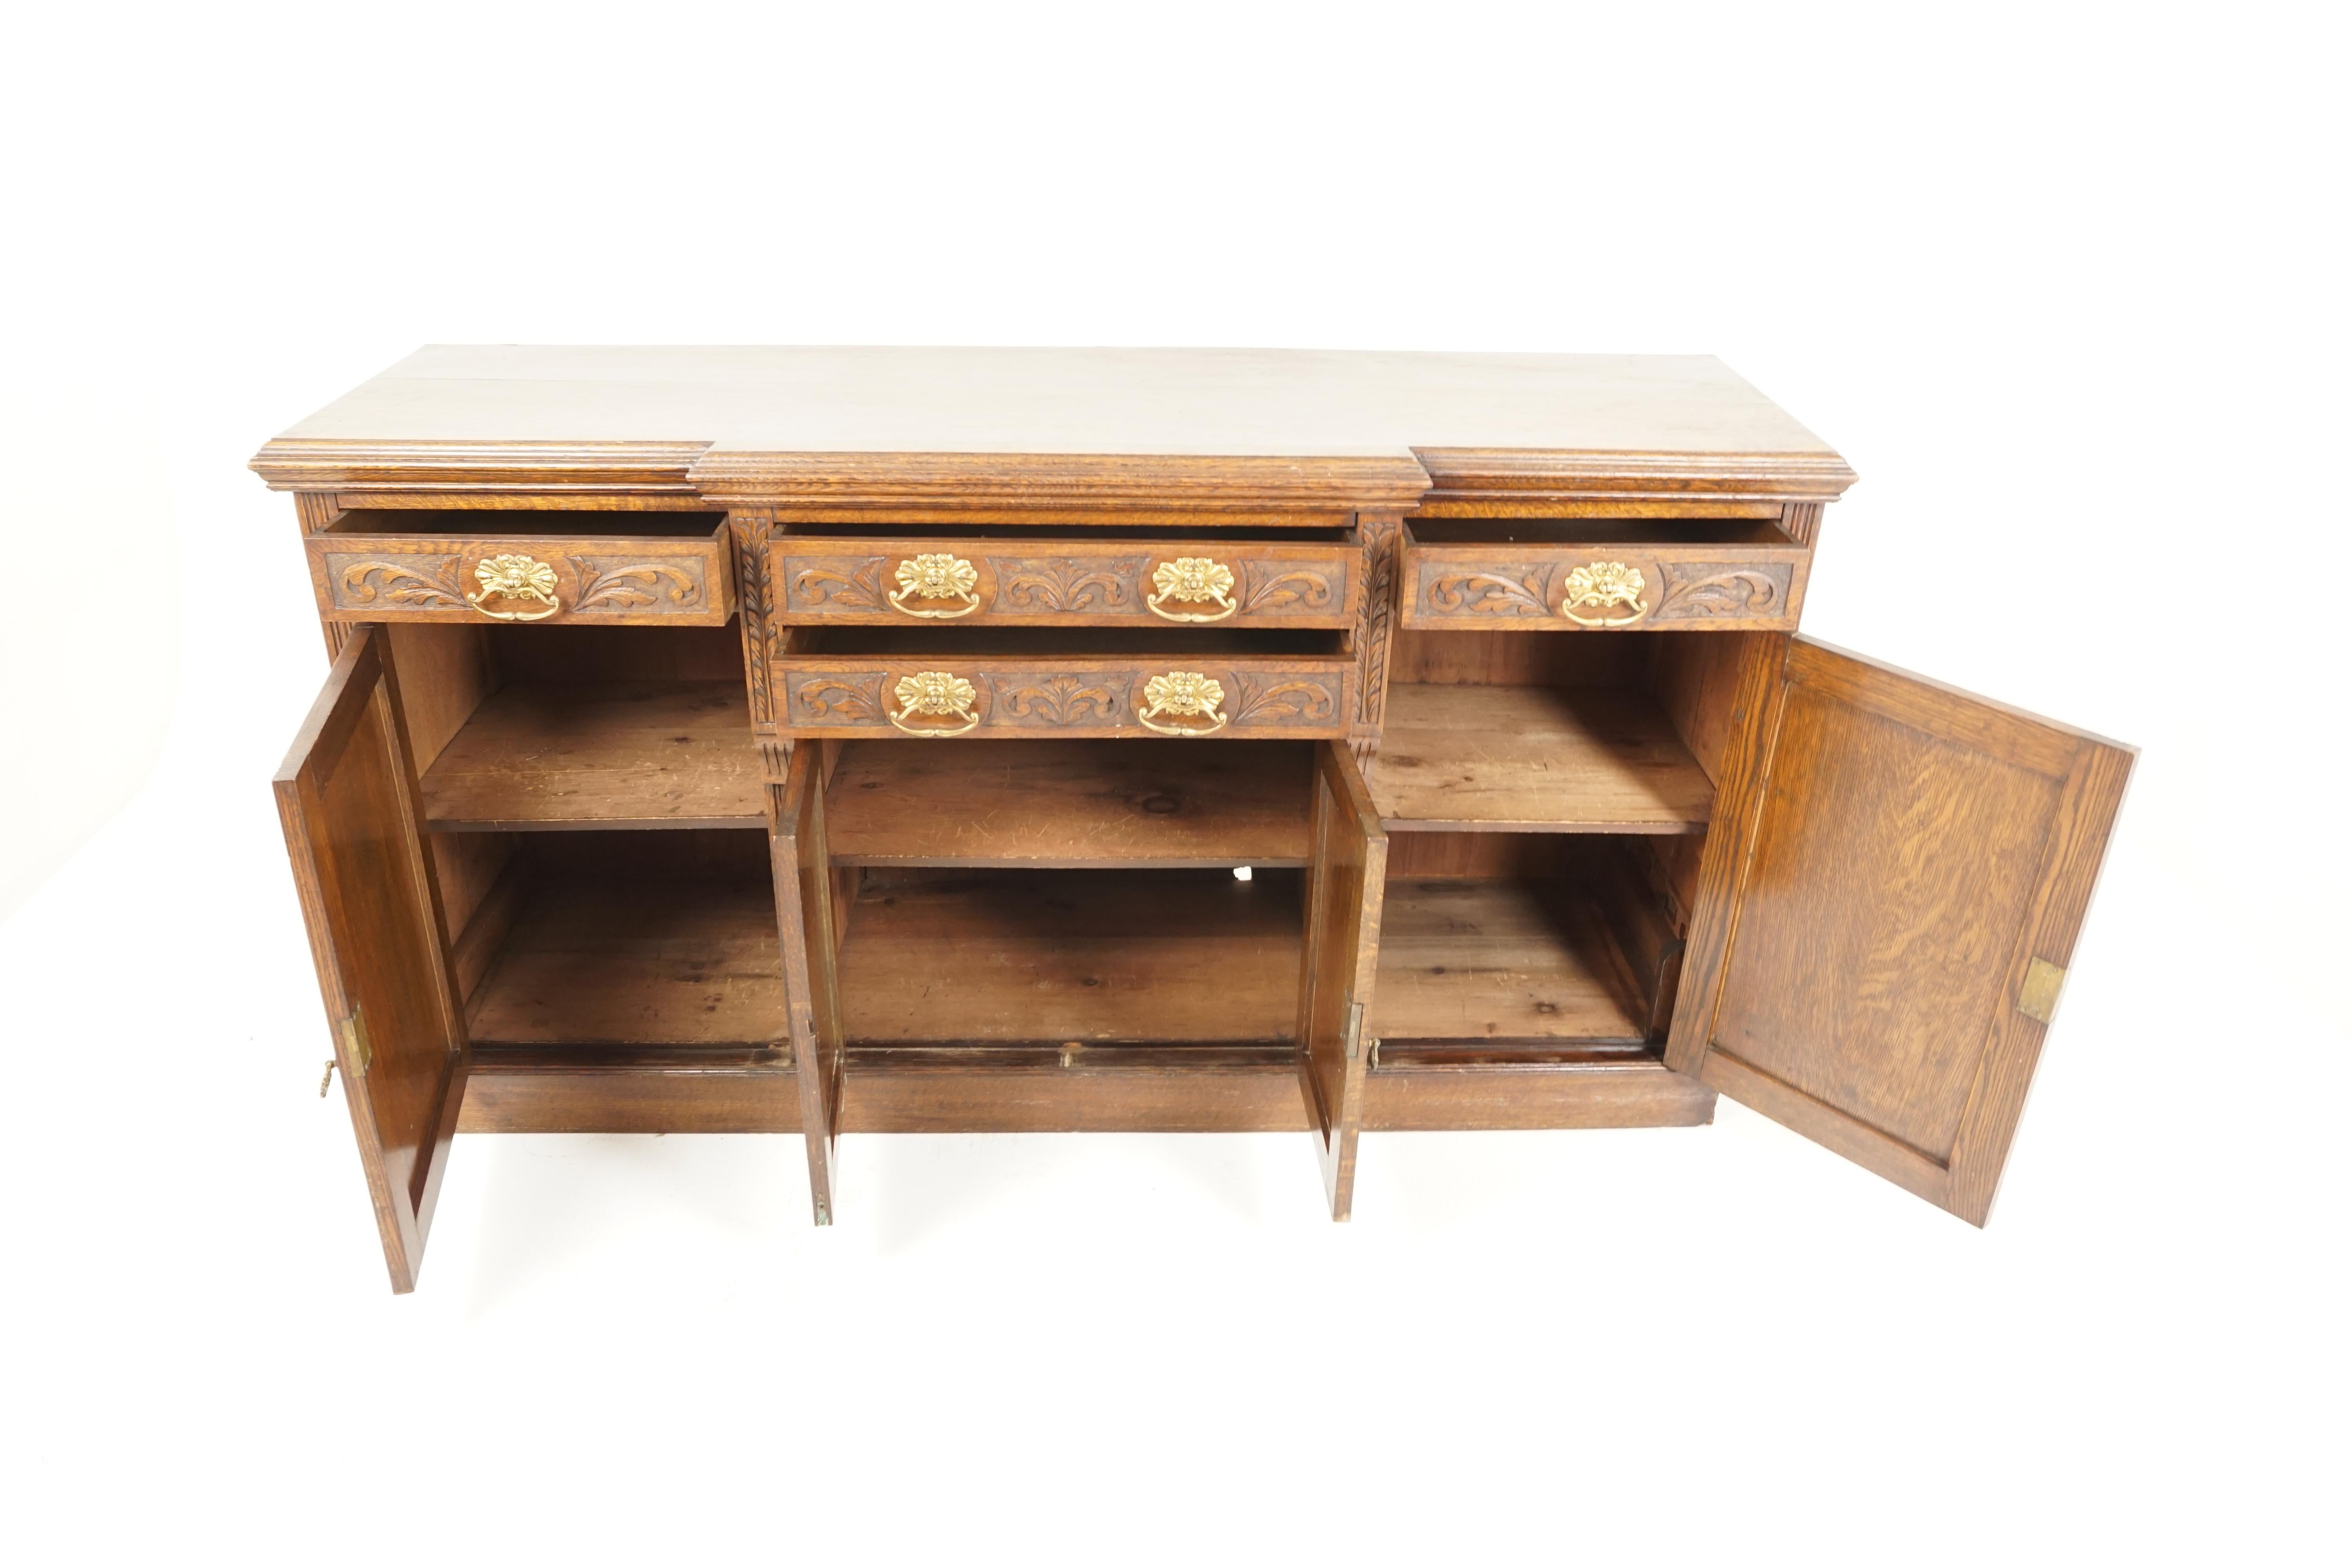 Antique Victorian sideboard, carved oak, buffet/chiffonier, Scotland 1900, B2696

Scotland 1900
solid oak
original finish
moulded rectangular top
heavily carved front with a pair of carved drawers in the middle
flanked by a pair of